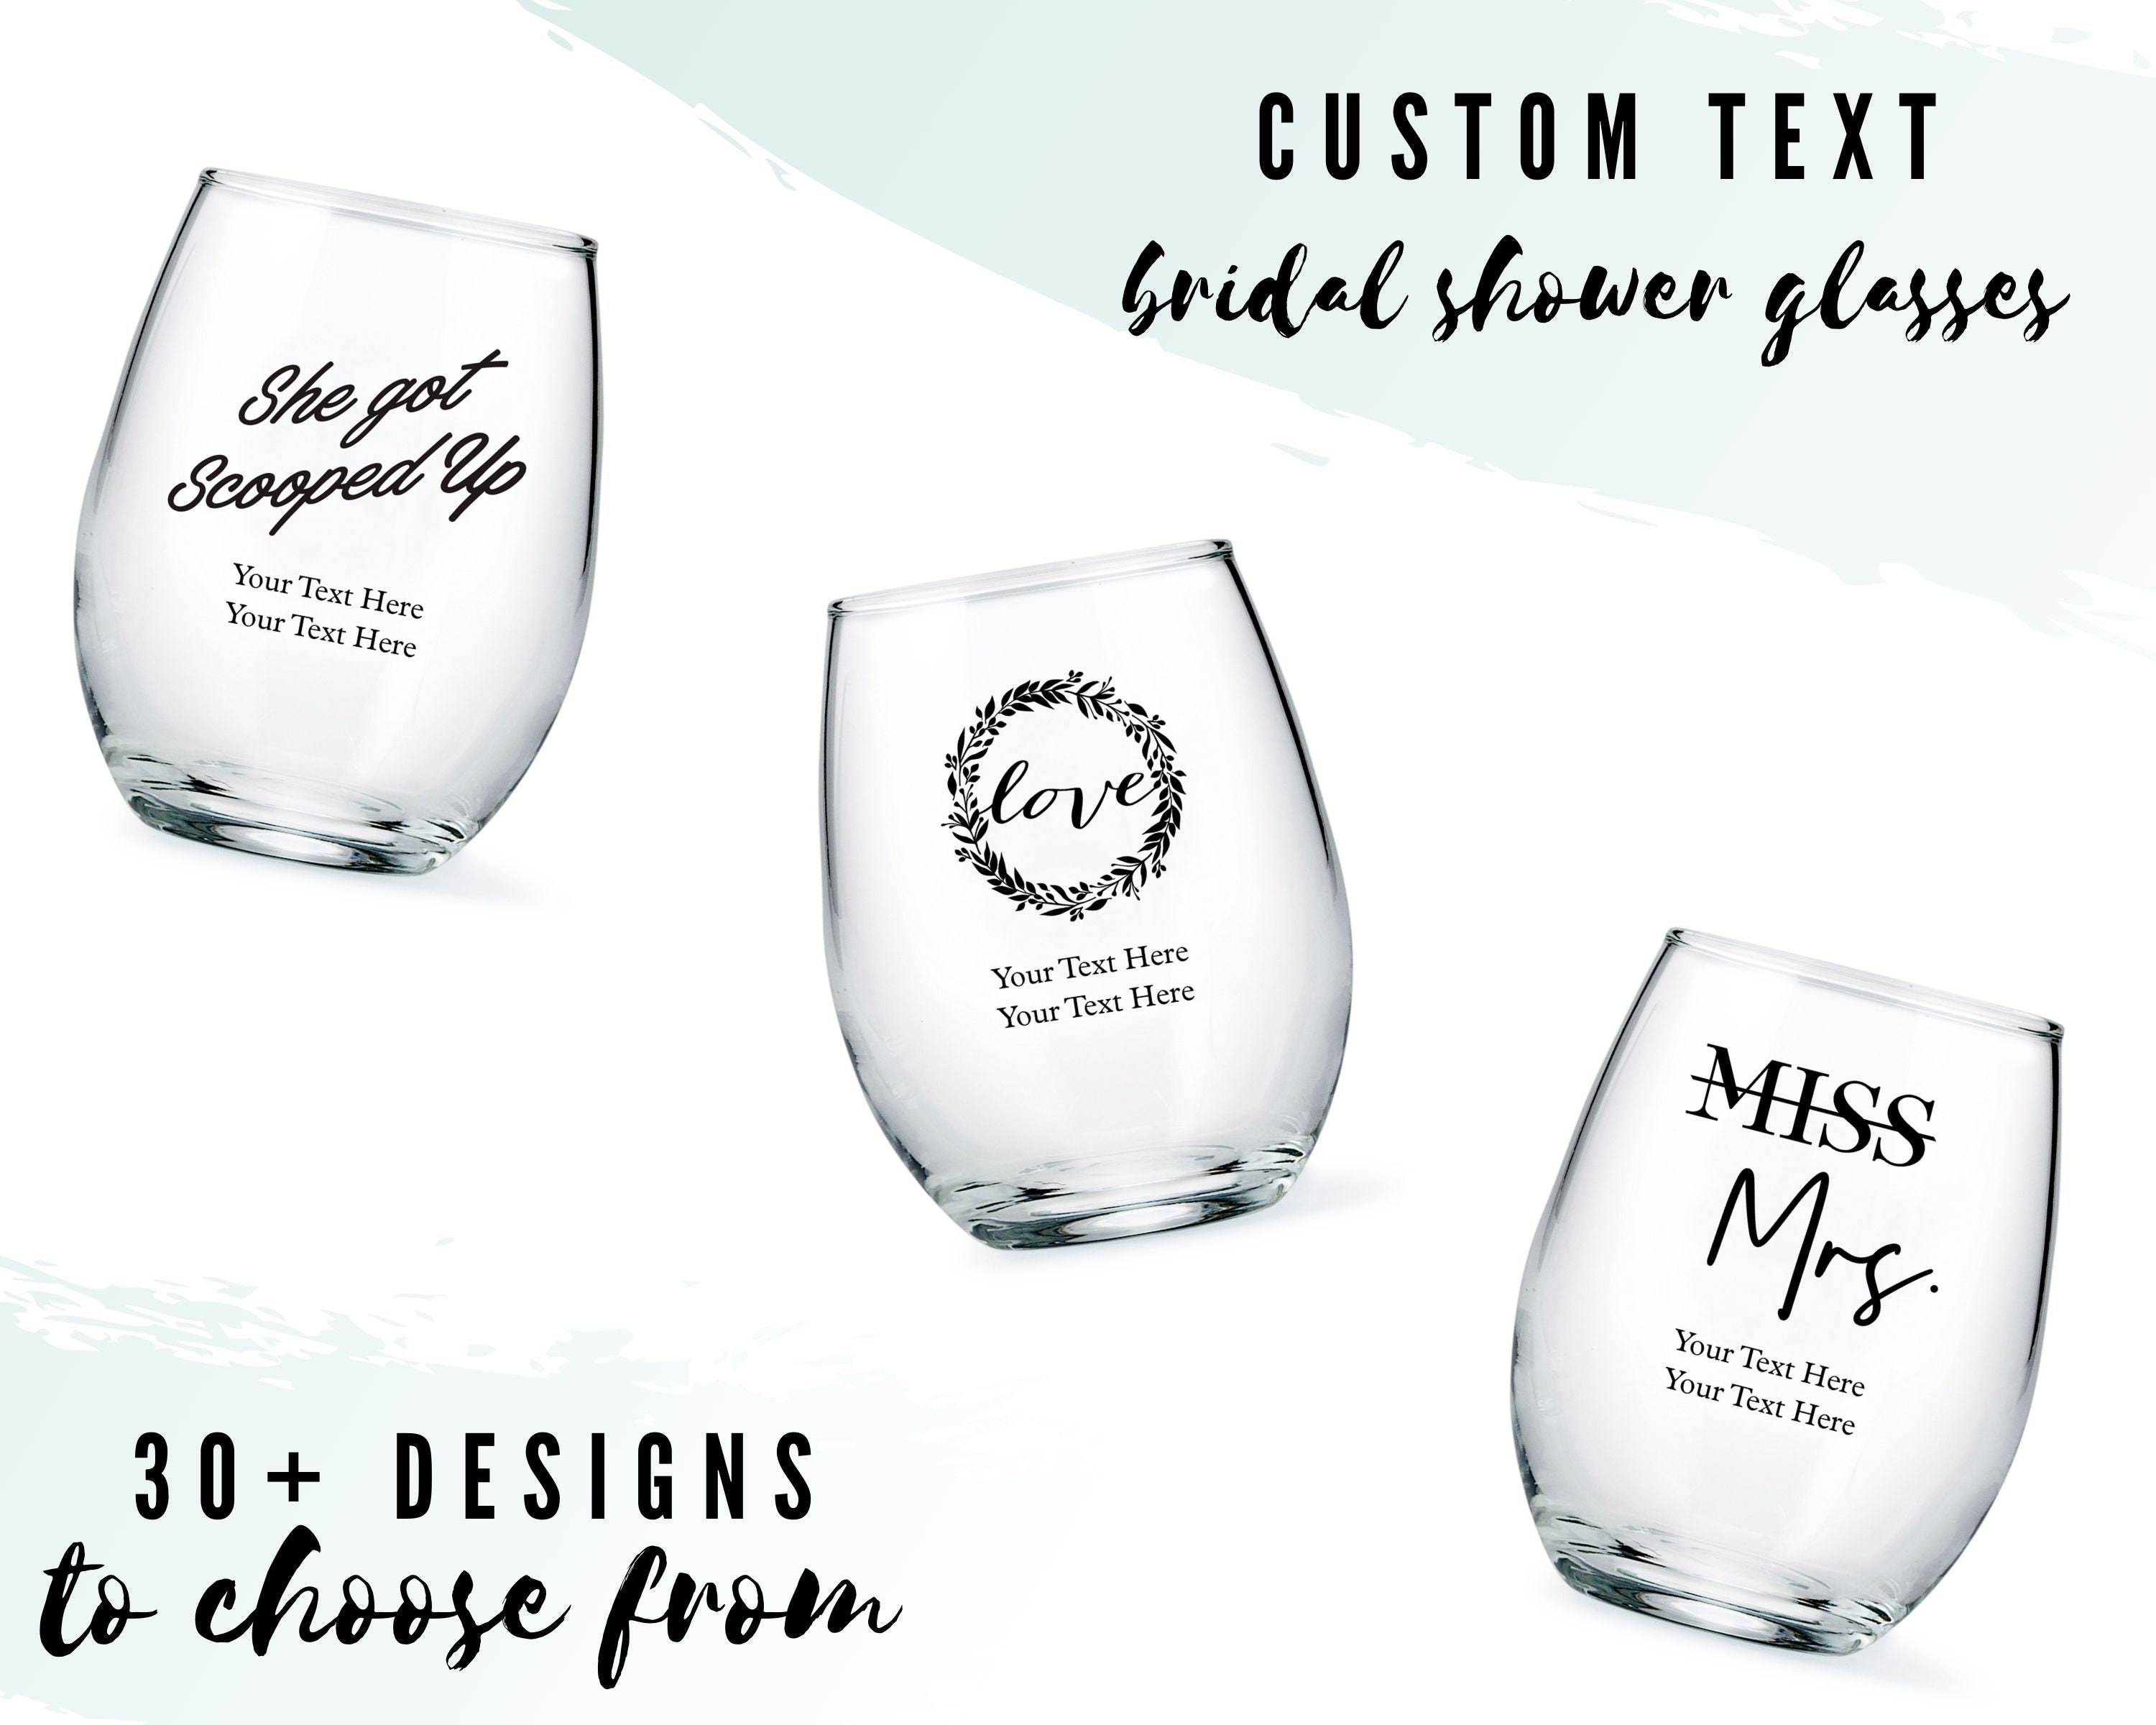 Choose you color glass Monogrammed Gift Wedding Glass- Bachelorette Party Stemless Wine Glass Customized Personalized Wine Glass